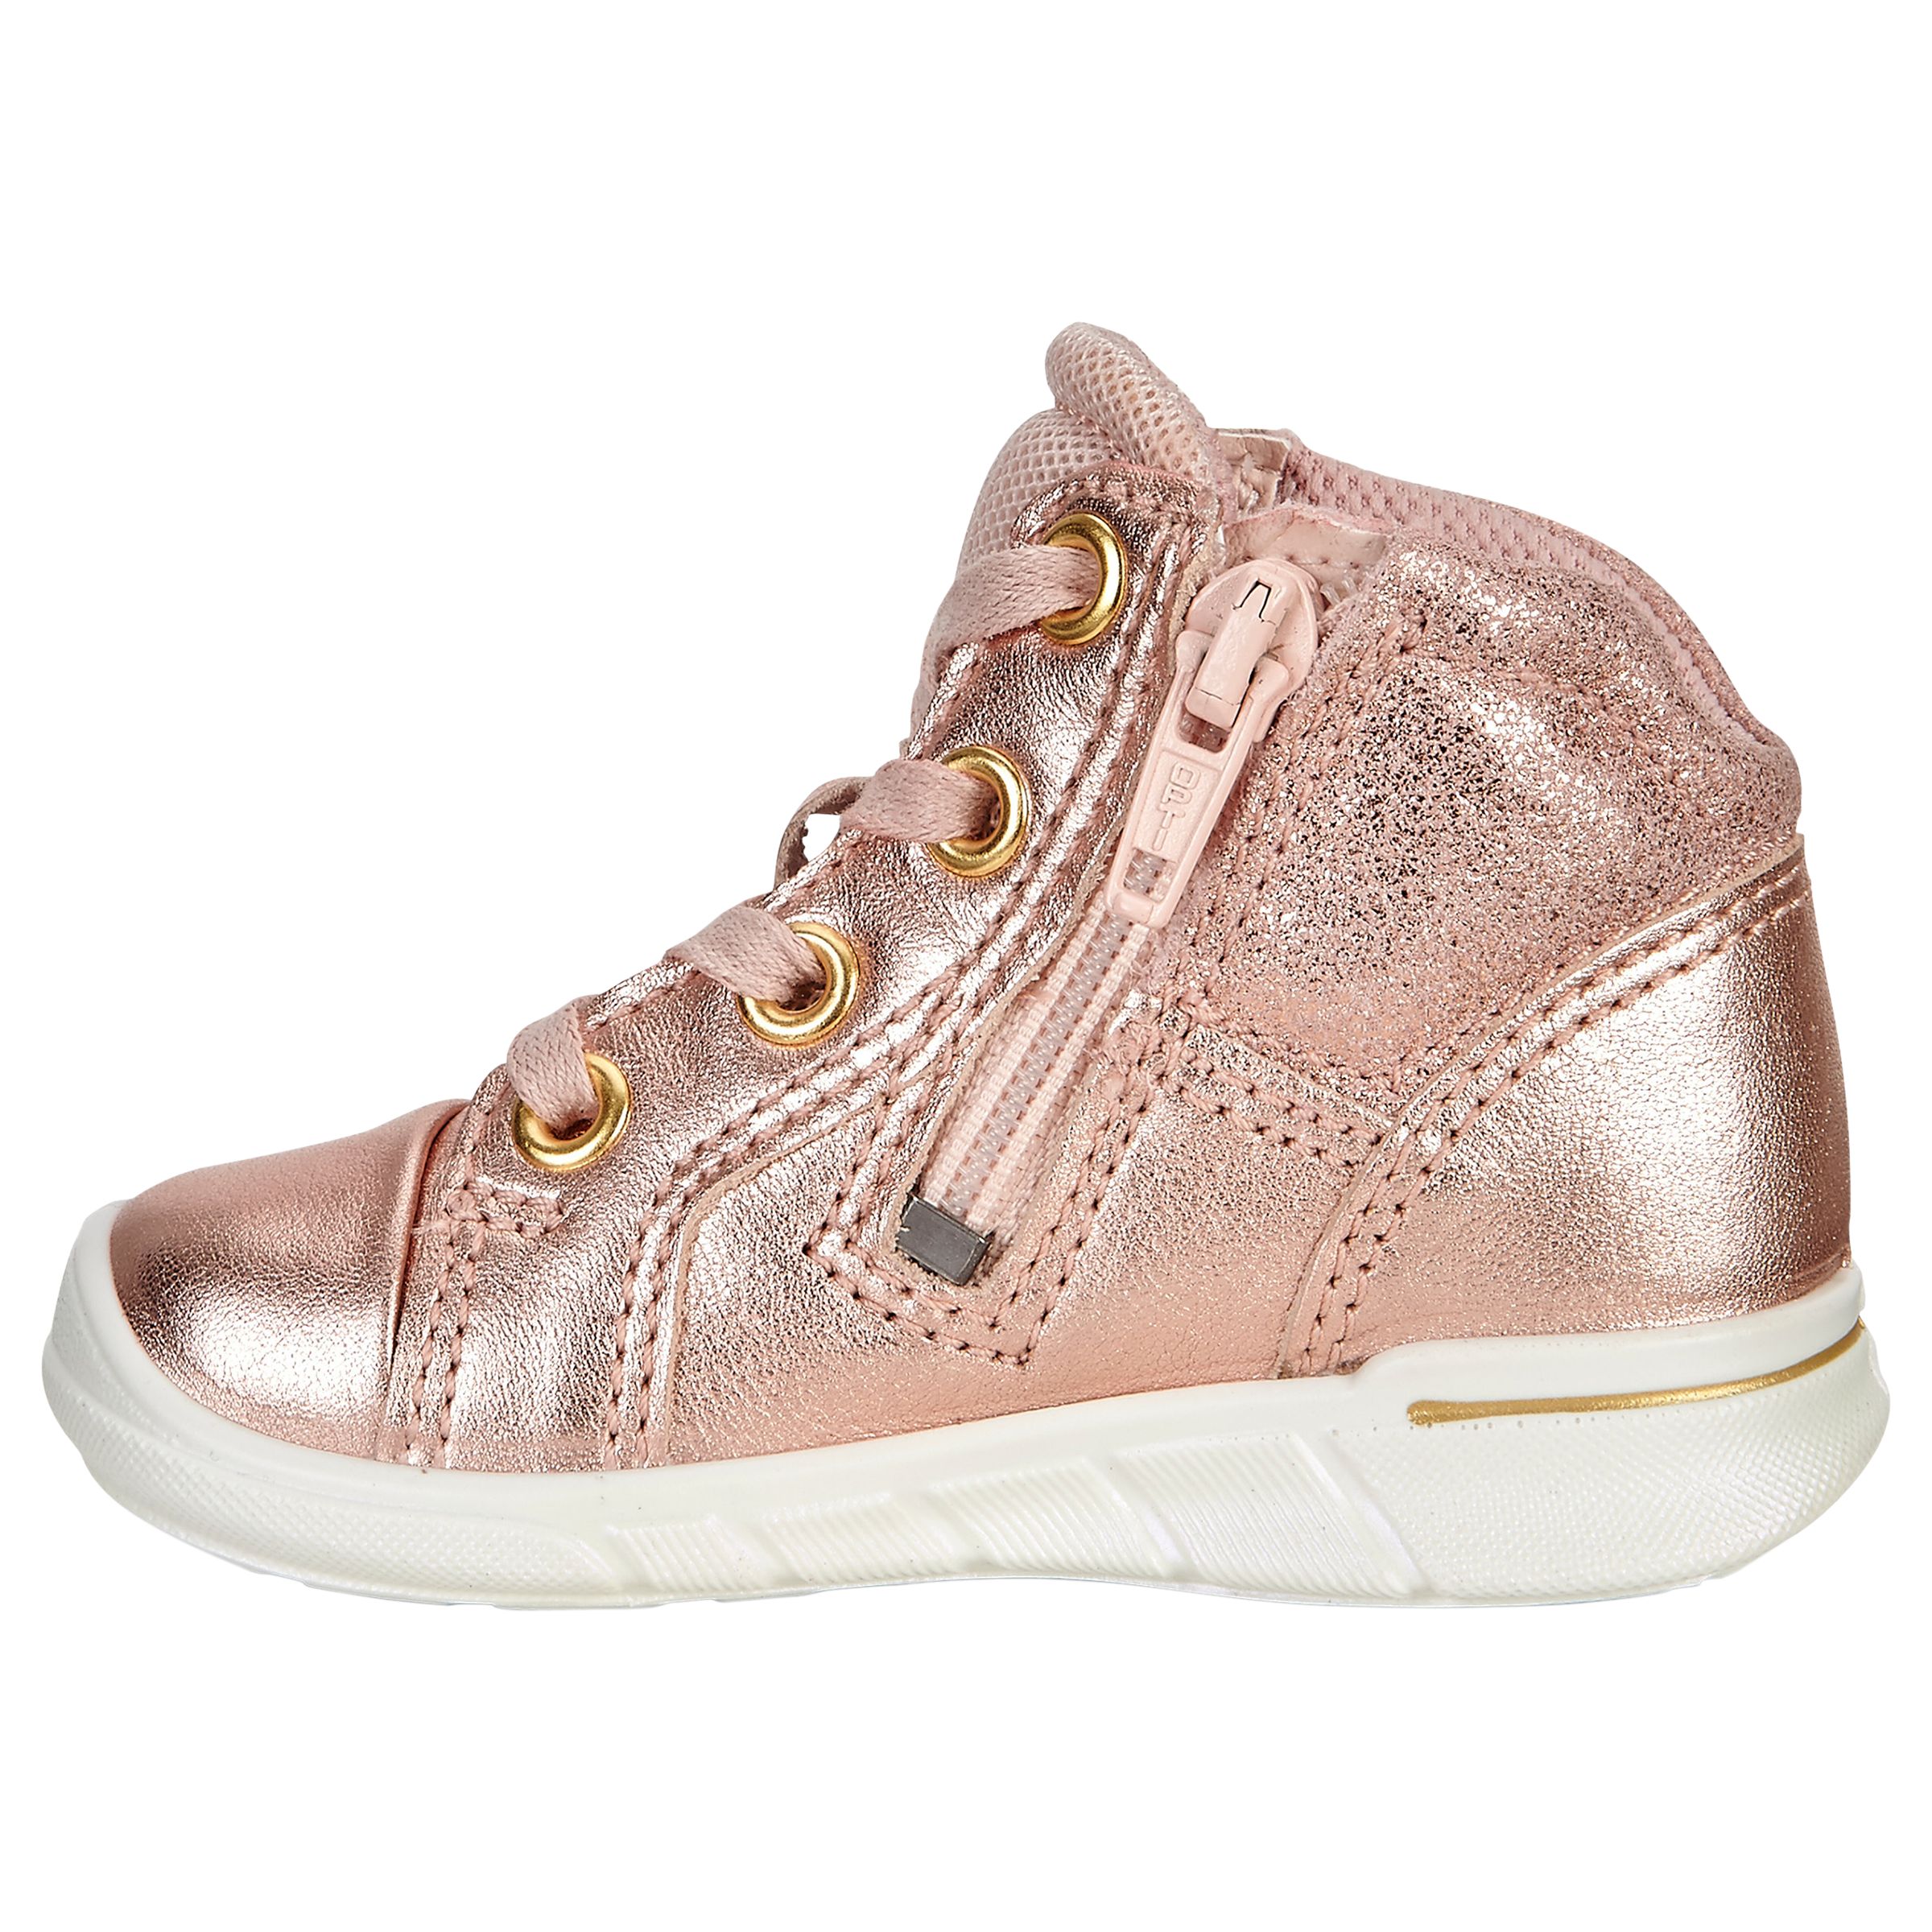 ECCO Children's First Bootie Infant Shoes, Rose Gold